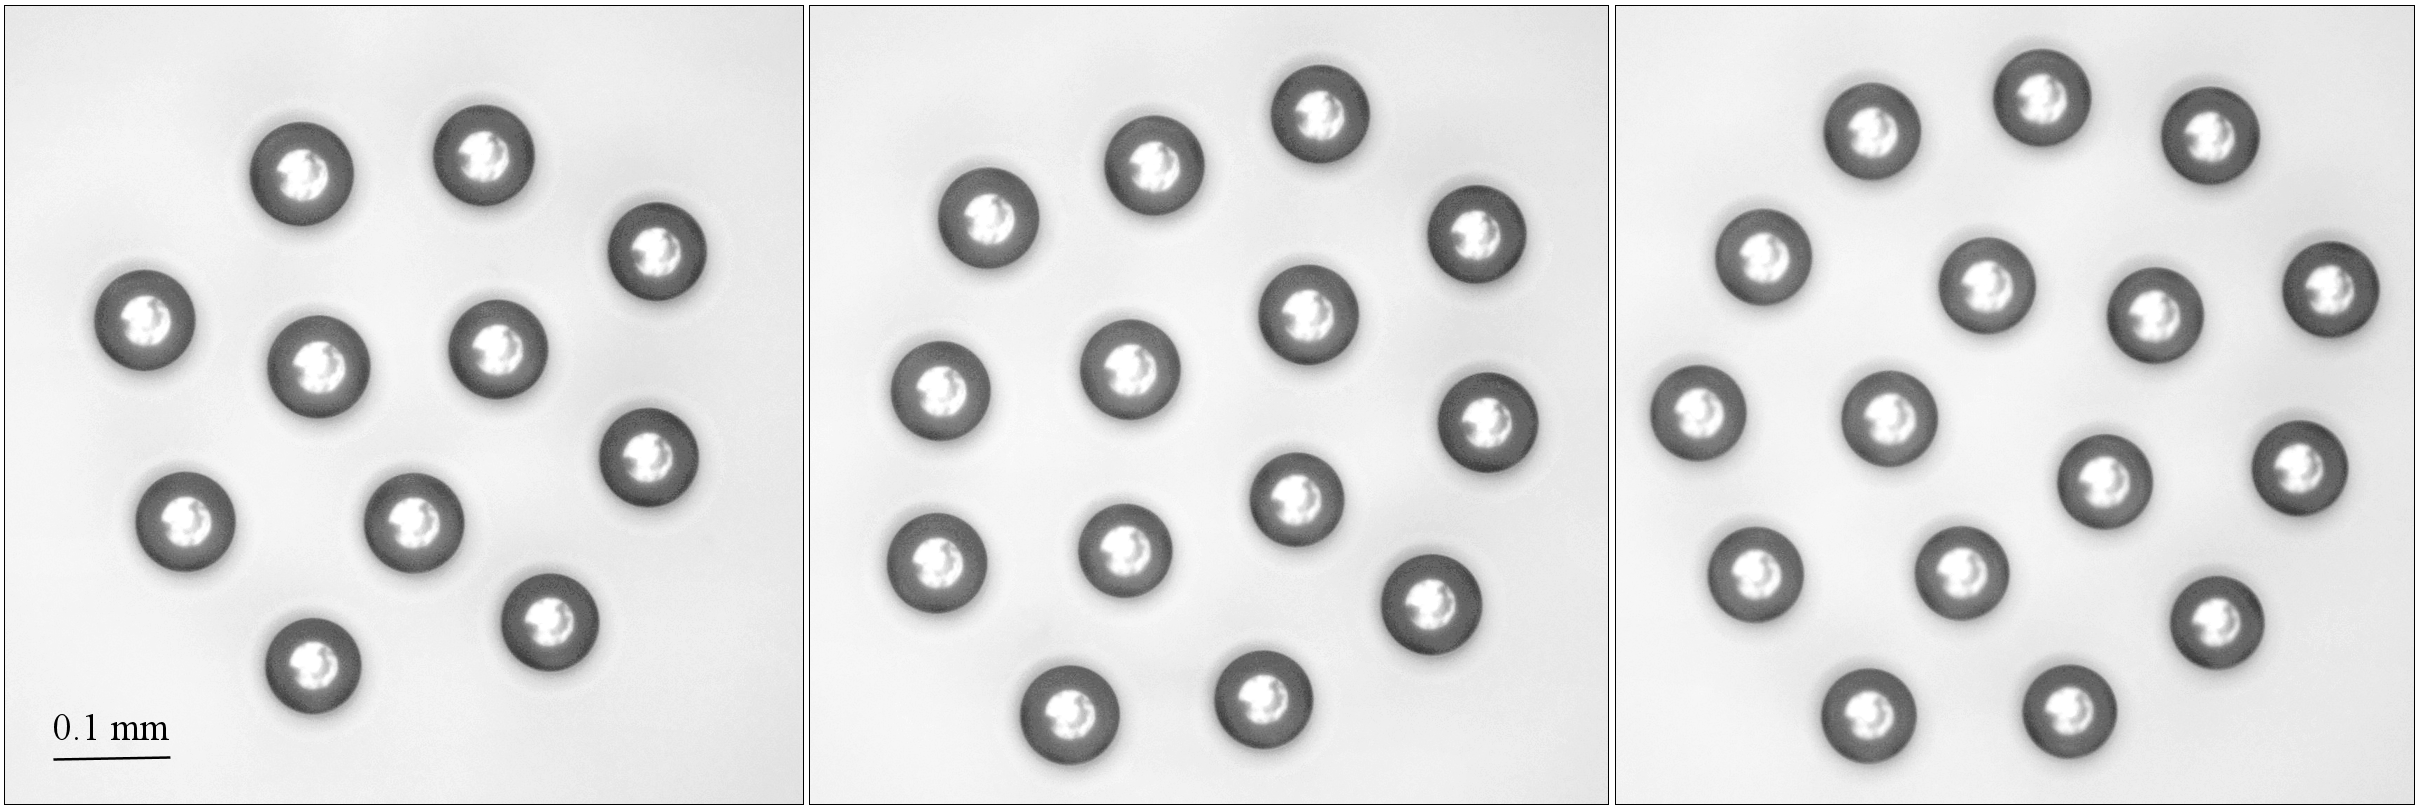 Typical small clusters of nearly identical droplets—clusters of 11, 14, and 16 droplets